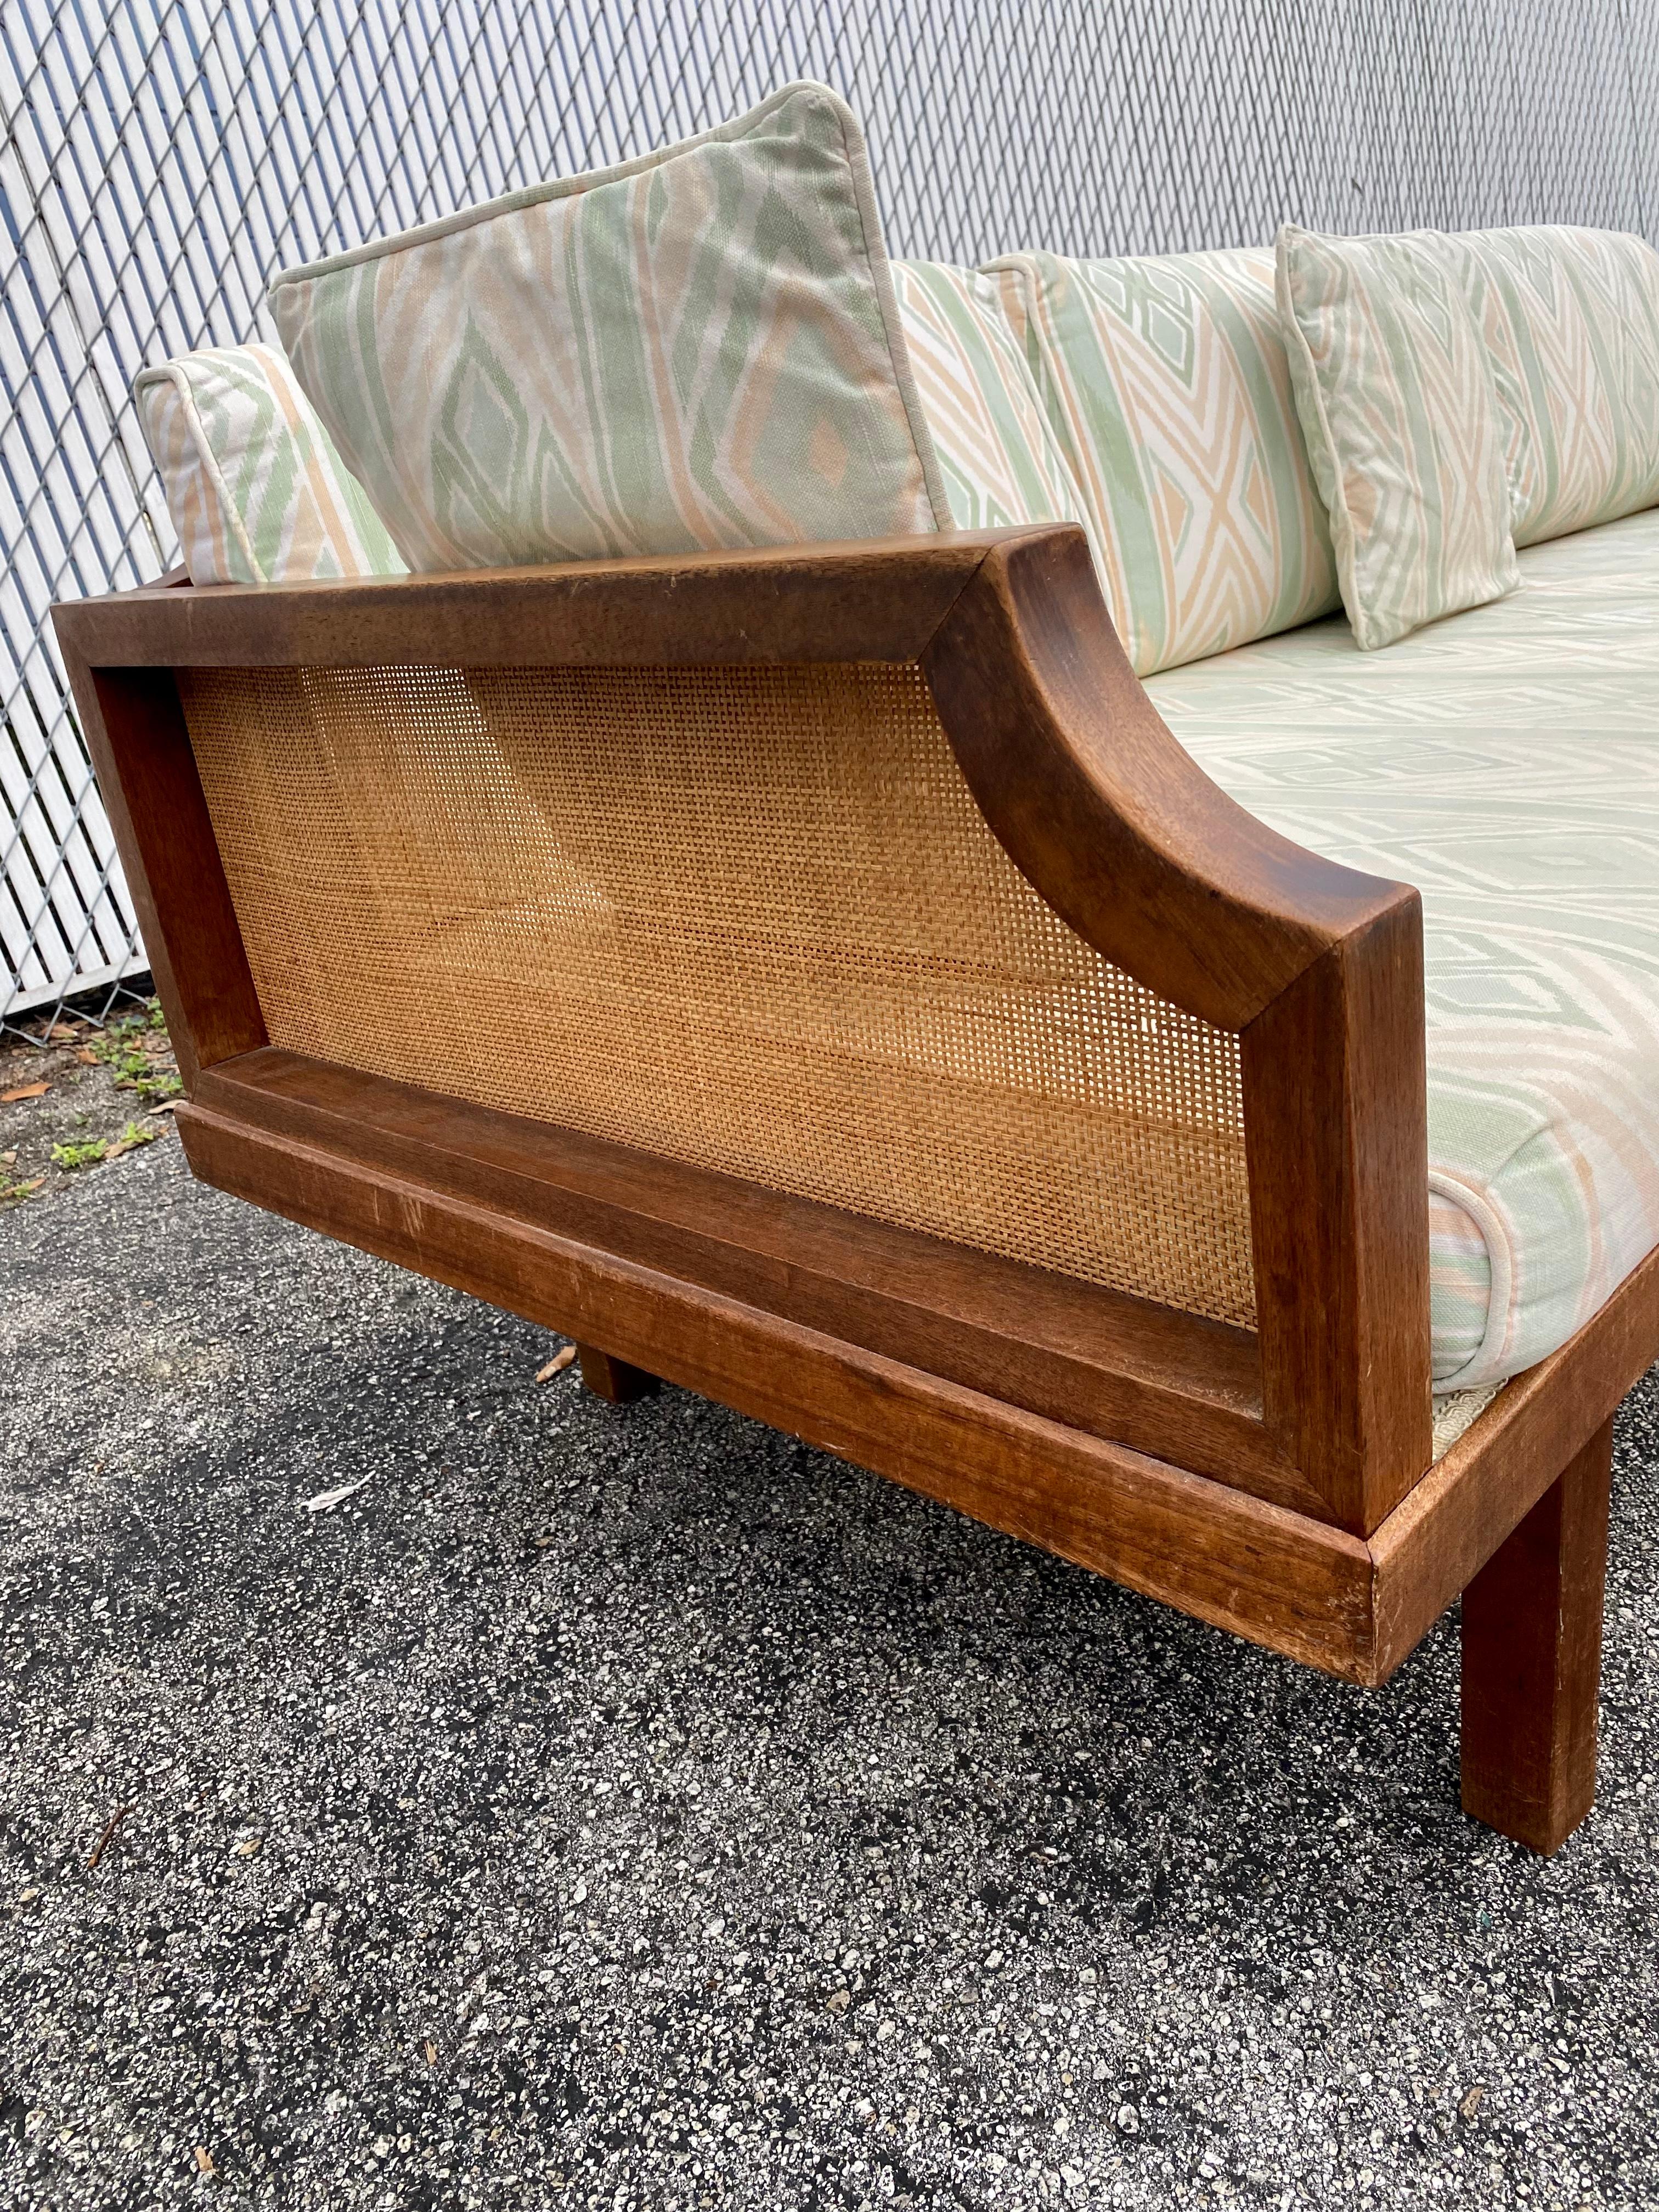 1960s Mid-Century Teak Cane Sofa or Daybed 4